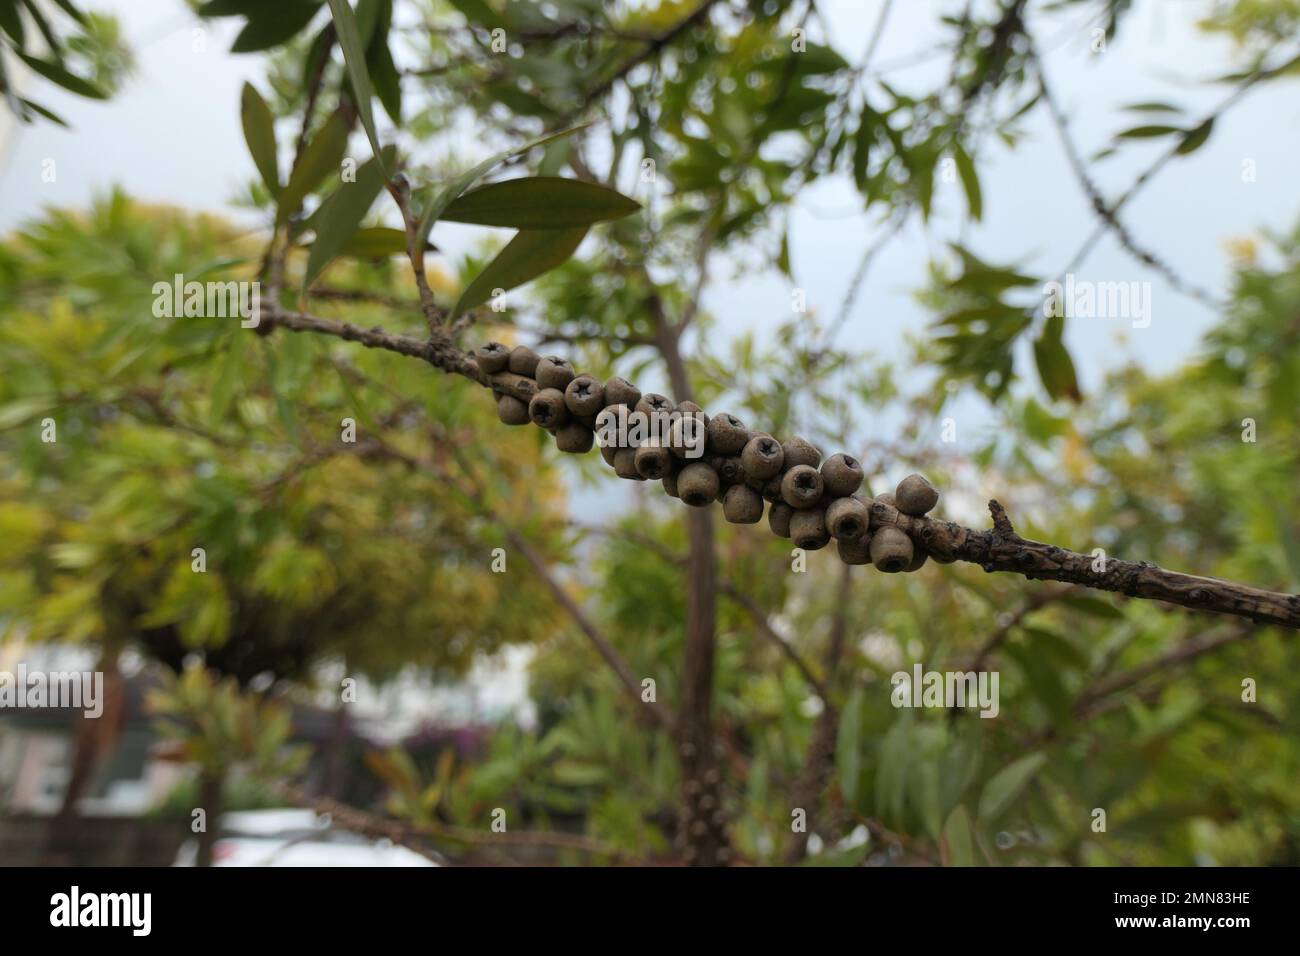 A branch full of Callistemon seeds in the city's park Stock Photo